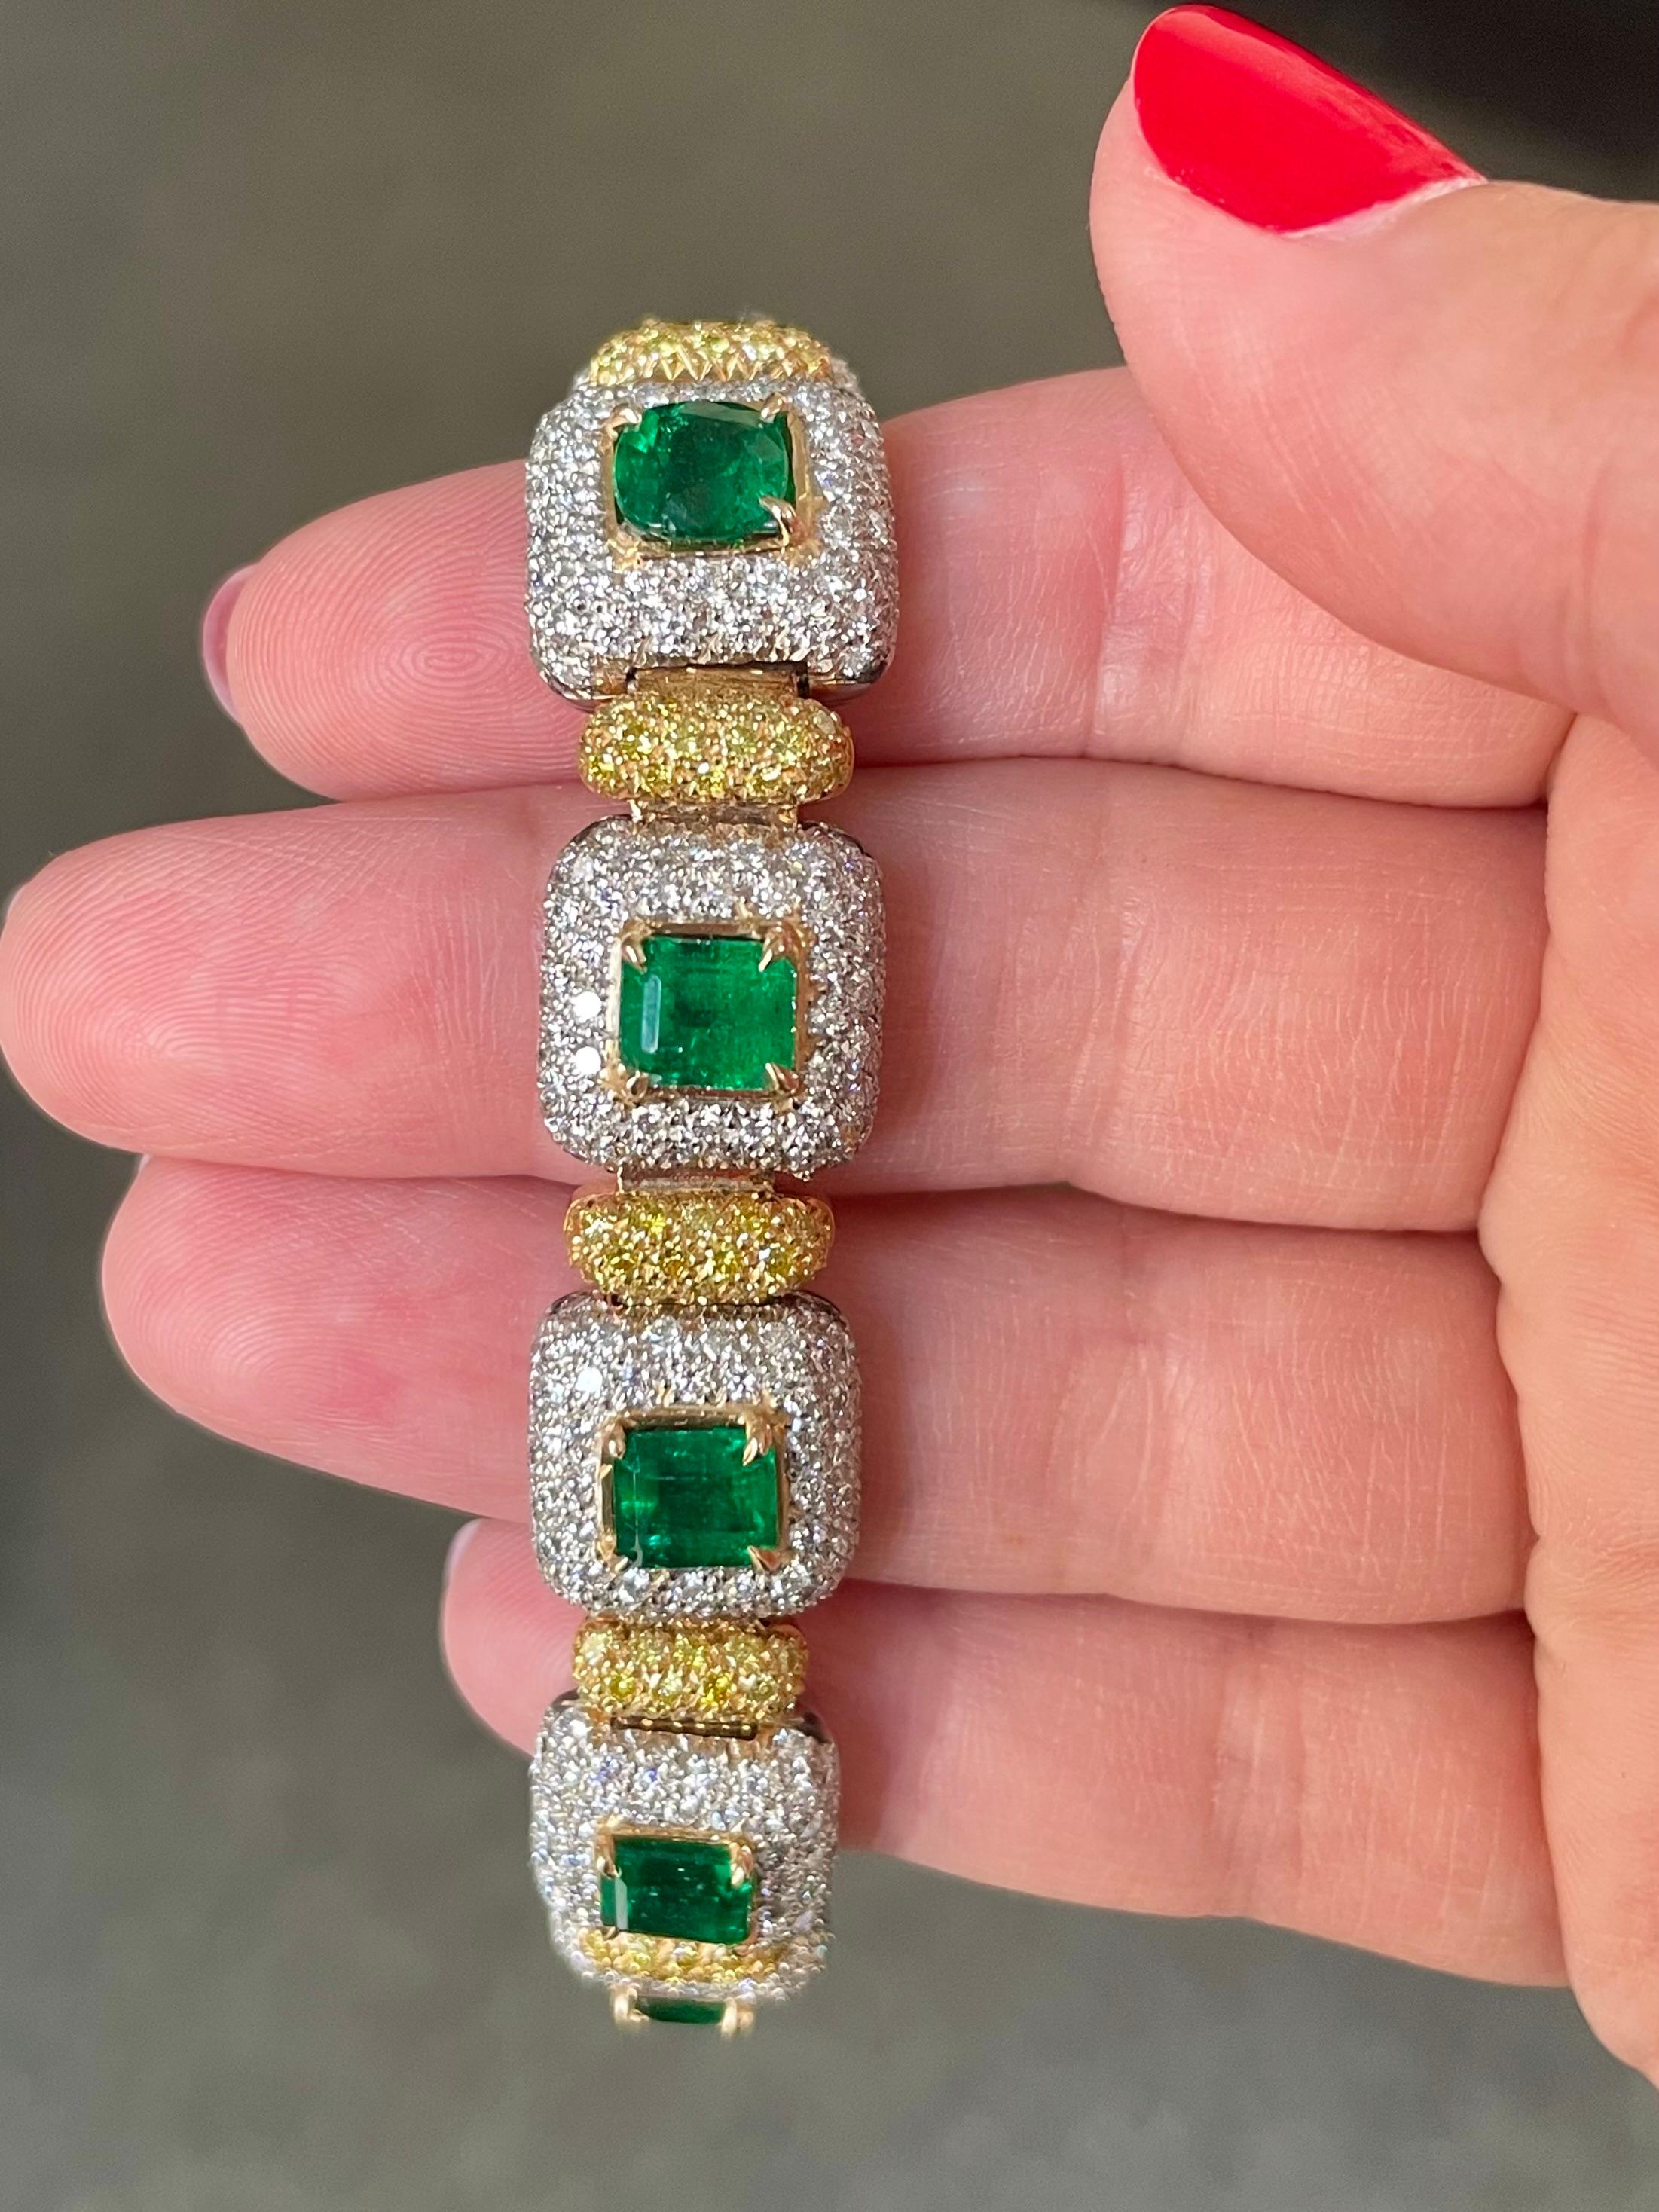 Emerald Cut J. Birnbach 9.63 ct Emerald Bracelet with White and Fancy Yellow Pave Diamonds  For Sale